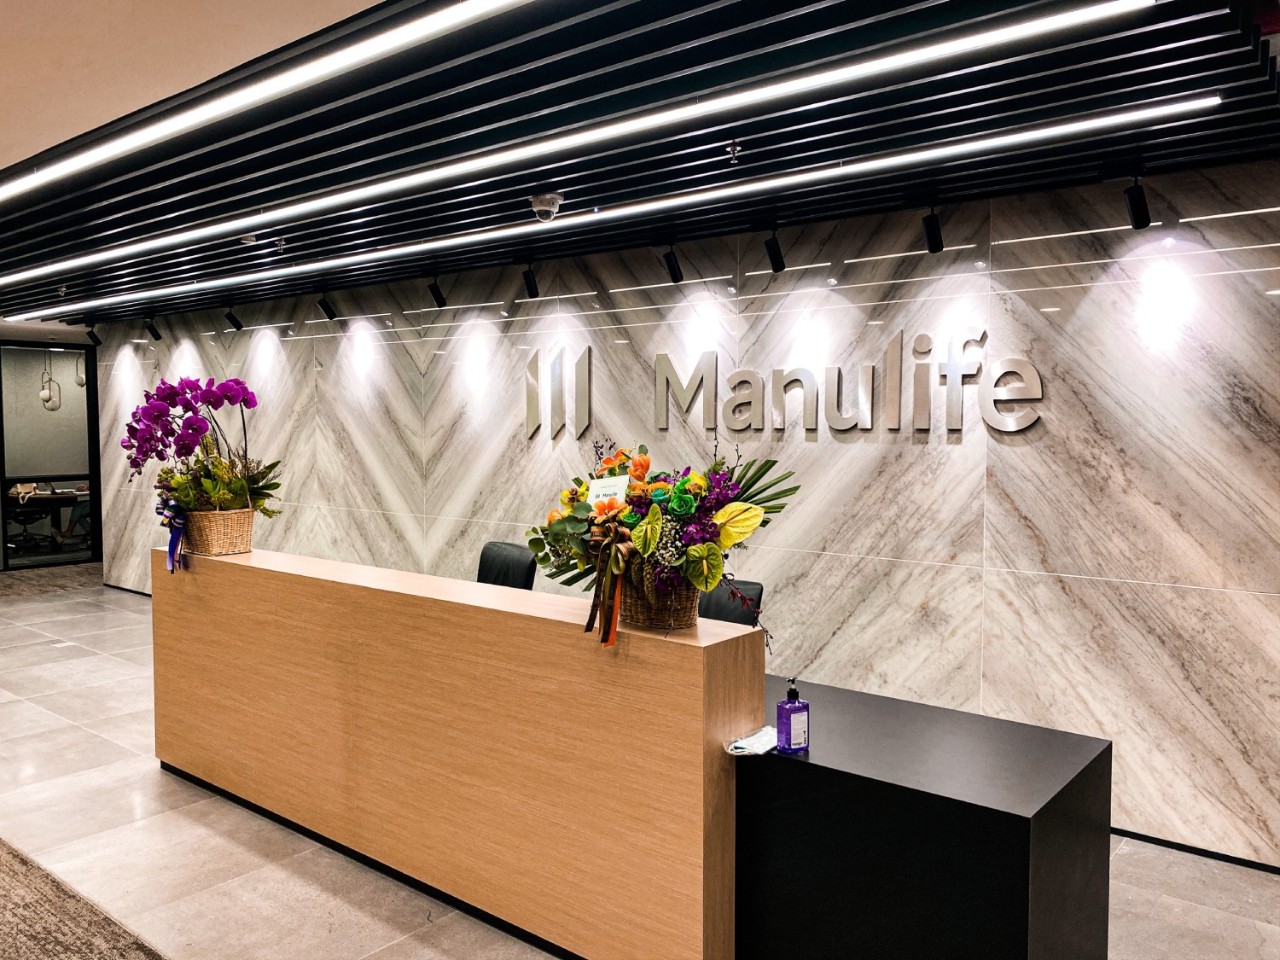 manulife cambodia - life insurance - new office - subpage - km